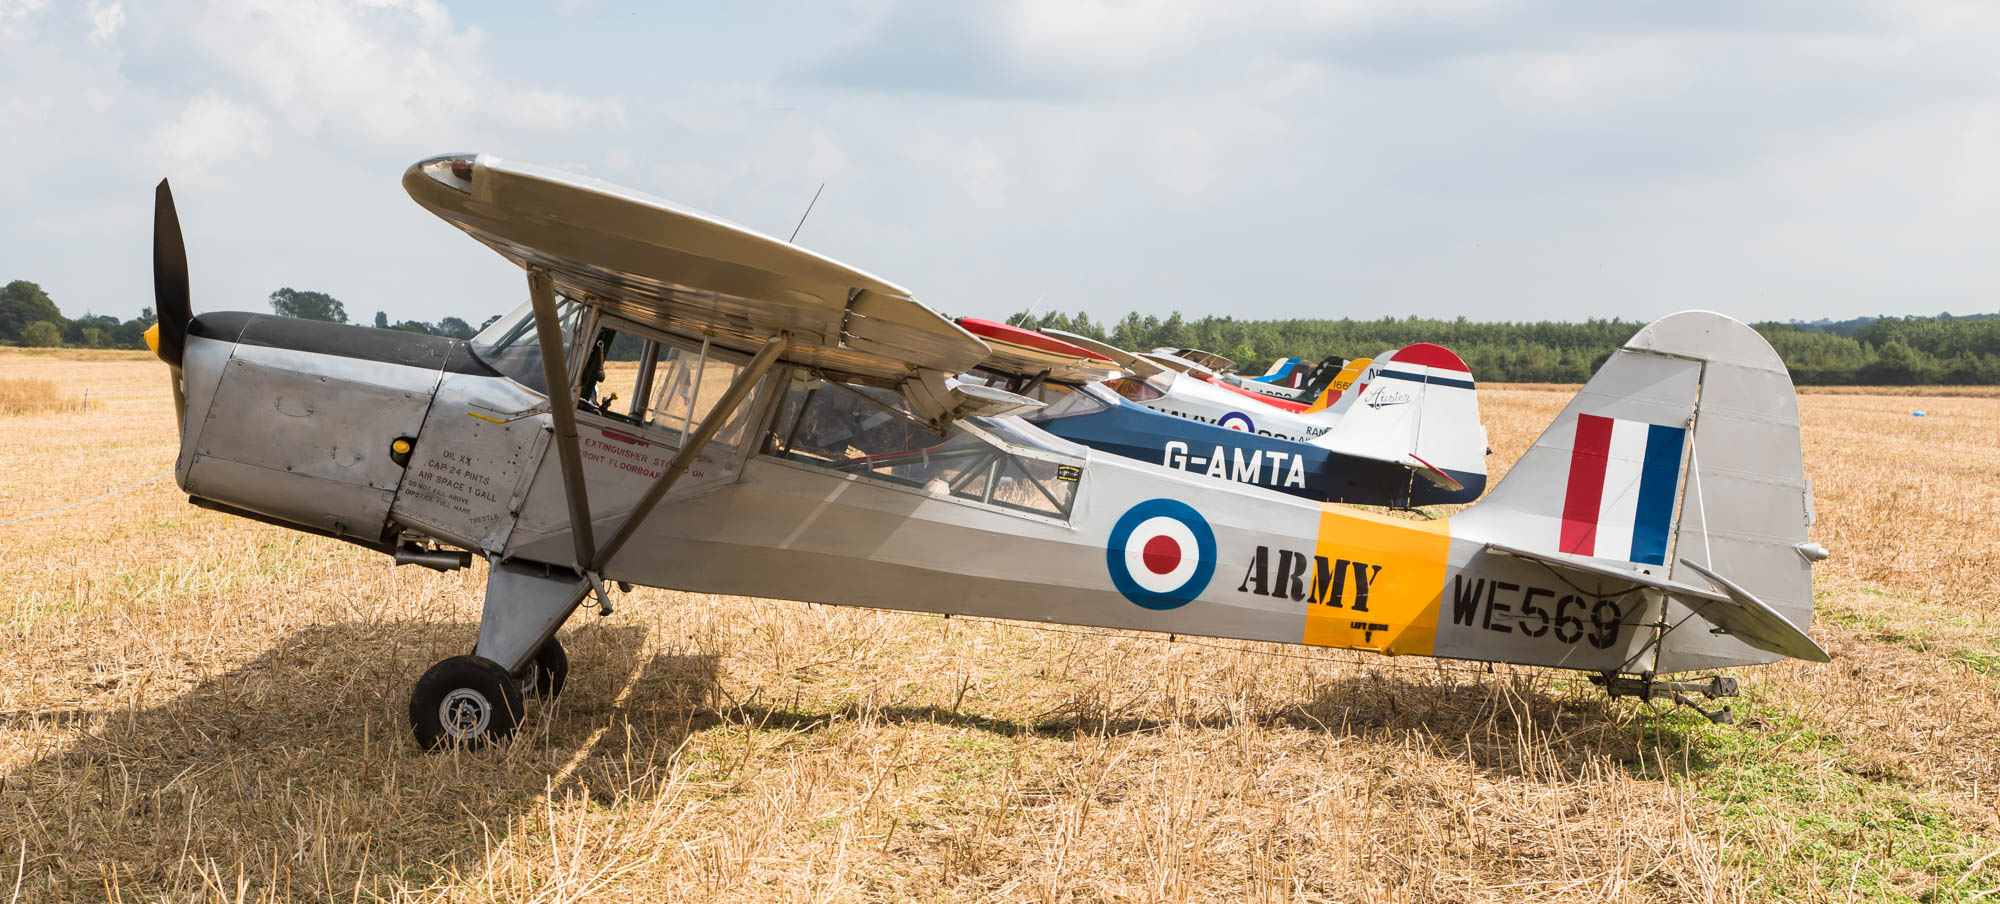 Auster Club Fly-In Rearsby